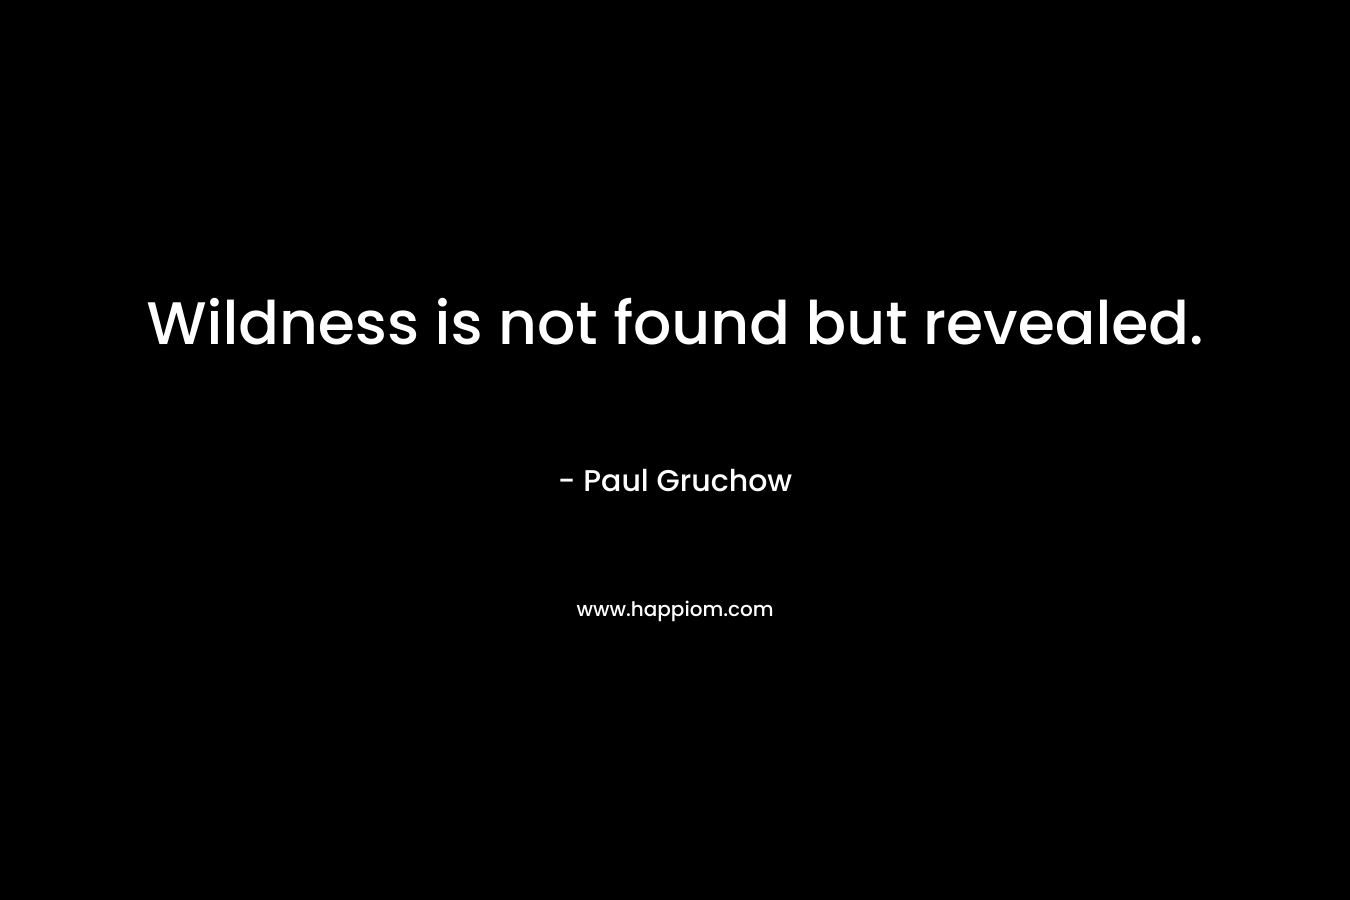 Wildness is not found but revealed. – Paul Gruchow